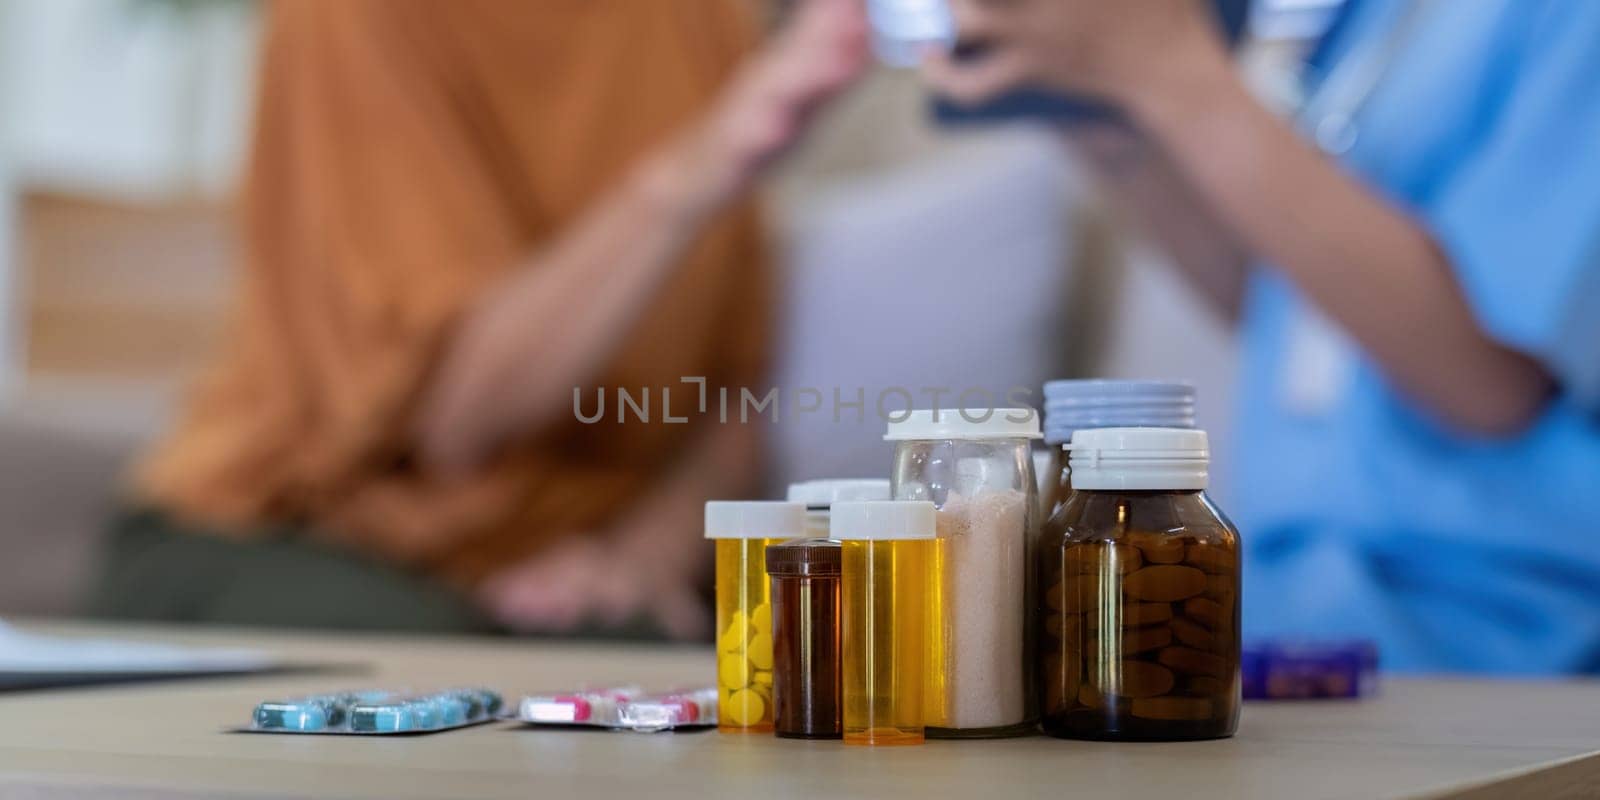 Close-up of various medication bottles and pills on a table with an elderly woman and caregiver in the background, highlighting elderly care and medication management